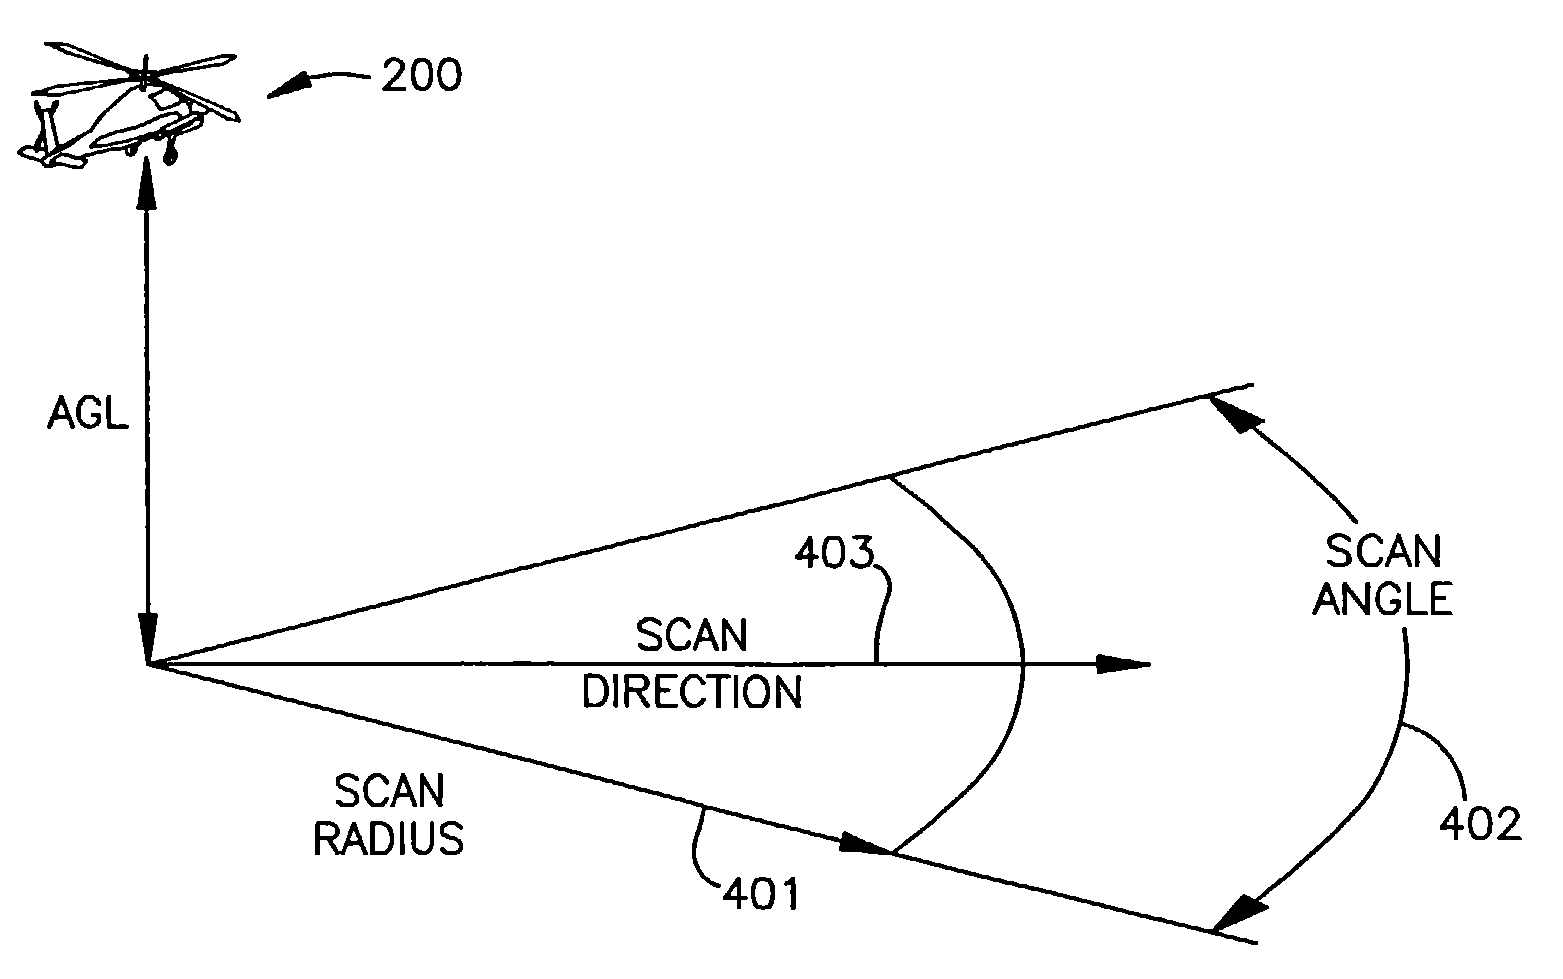 Real-time route and sensor planning system with variable mission objectives